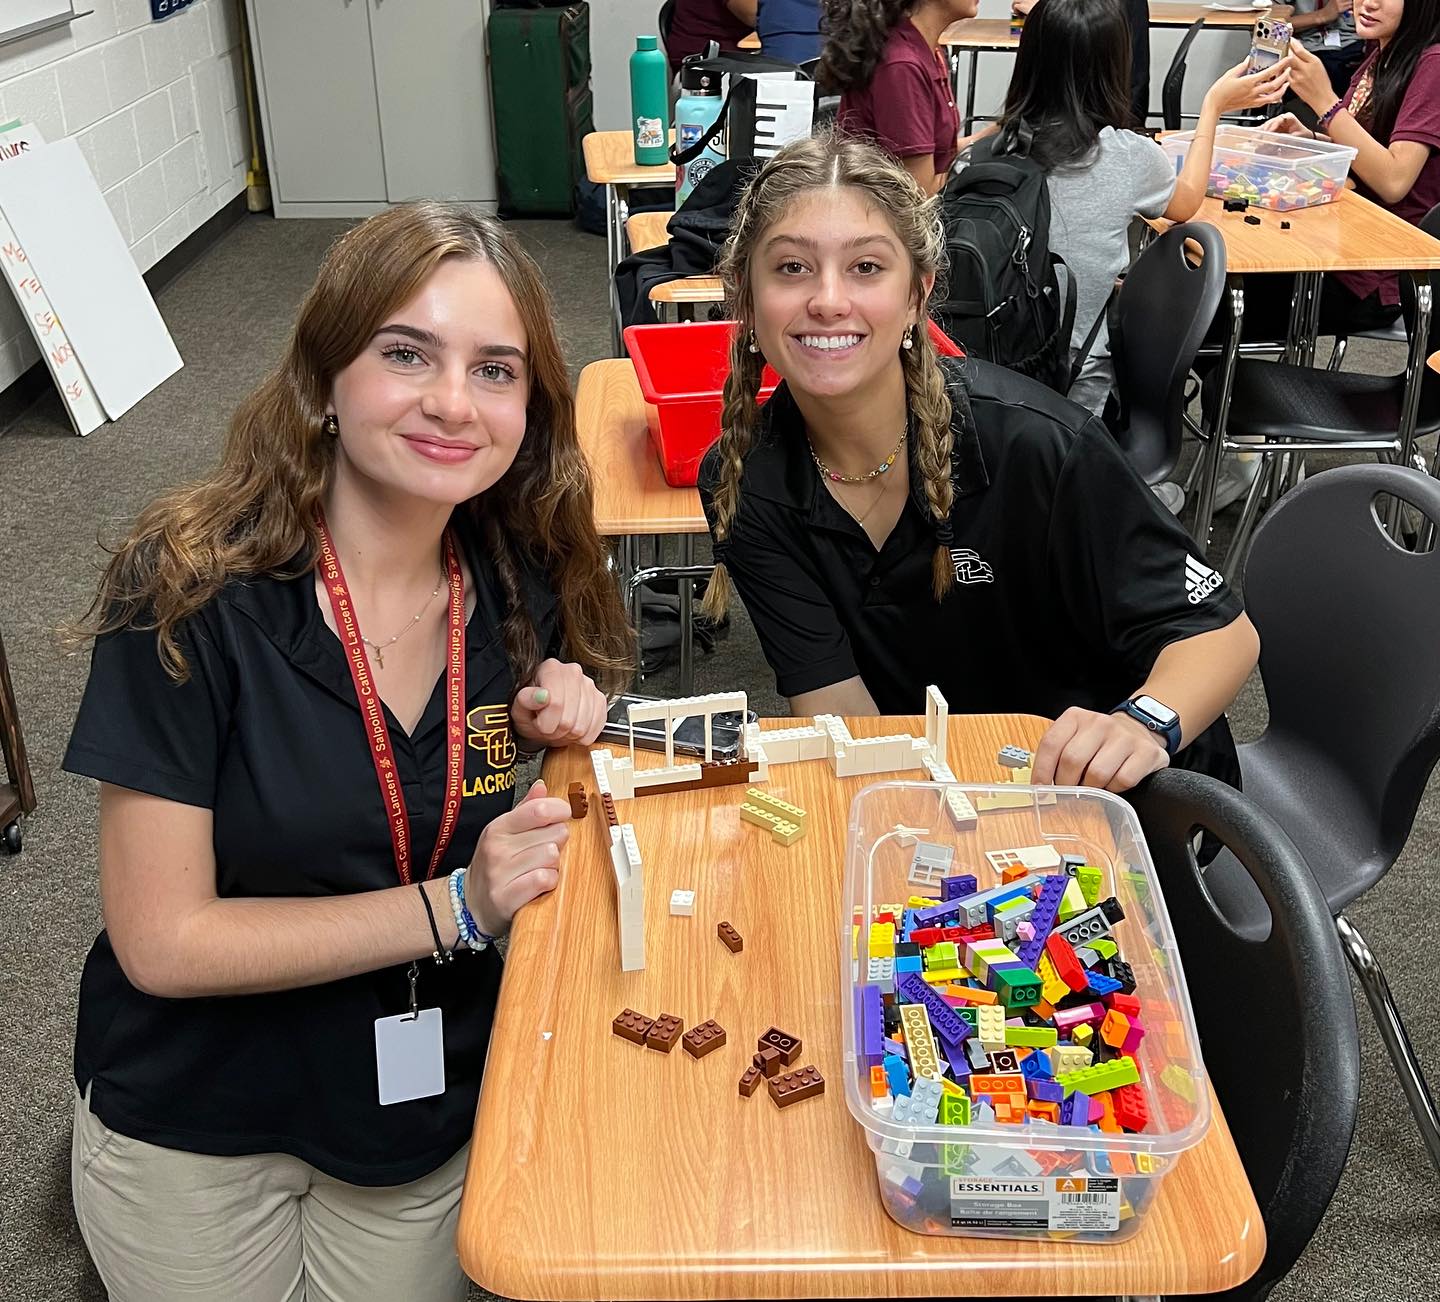 Students playing with legos